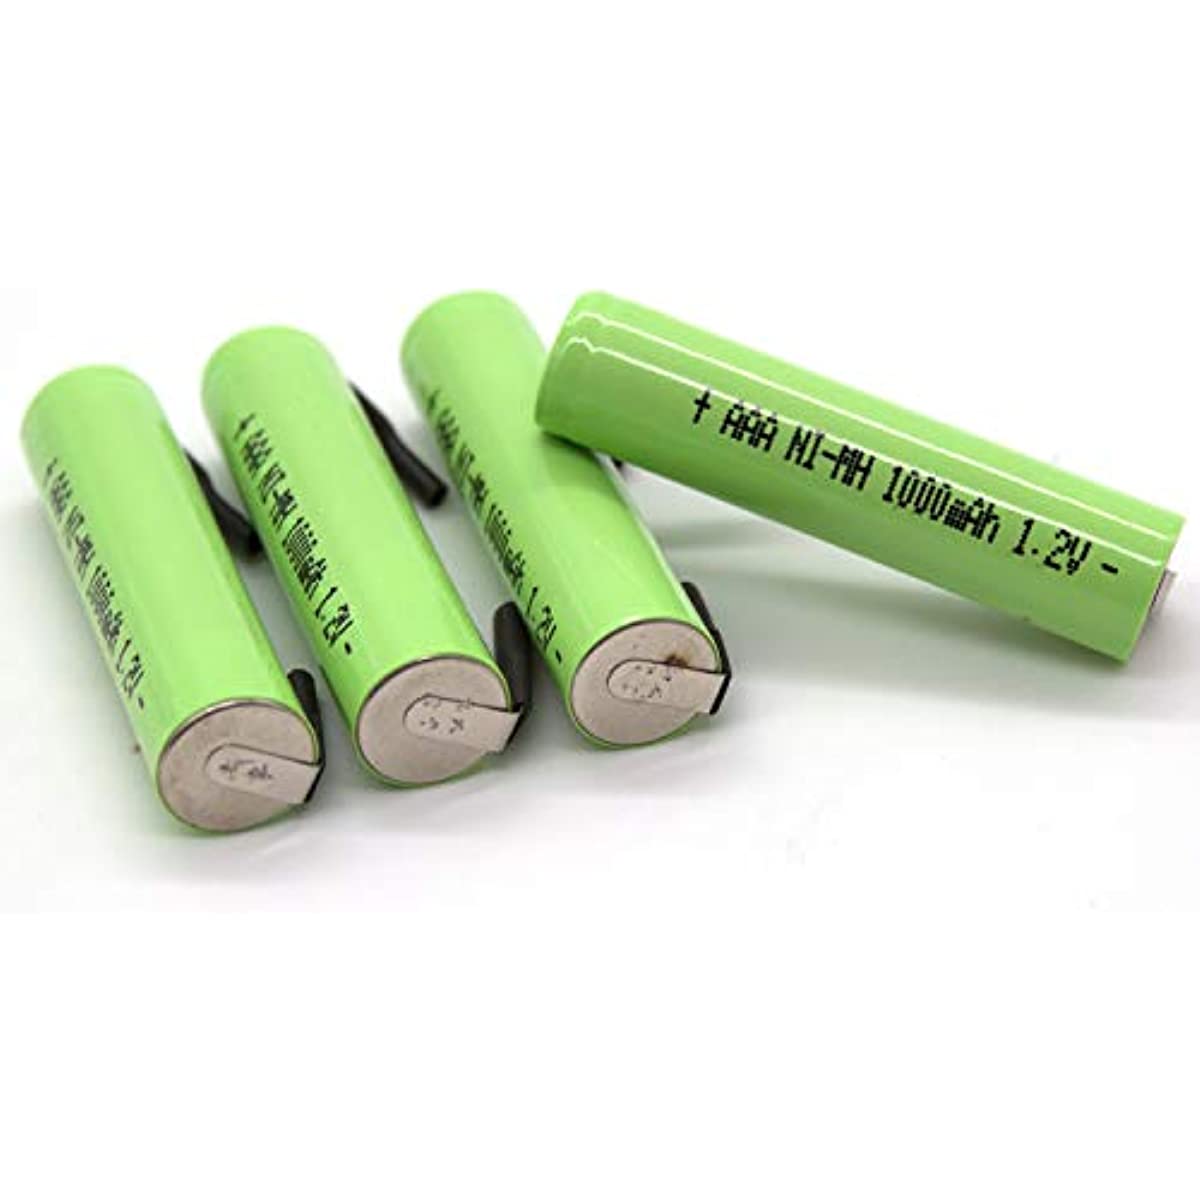 ZINMARK (4-Pack) 1.2V Ni-MH AAA 600mAh Rechargeable Battery w/Tabs Compatible with Electric Razors Toothbrushe High Power Static Applications